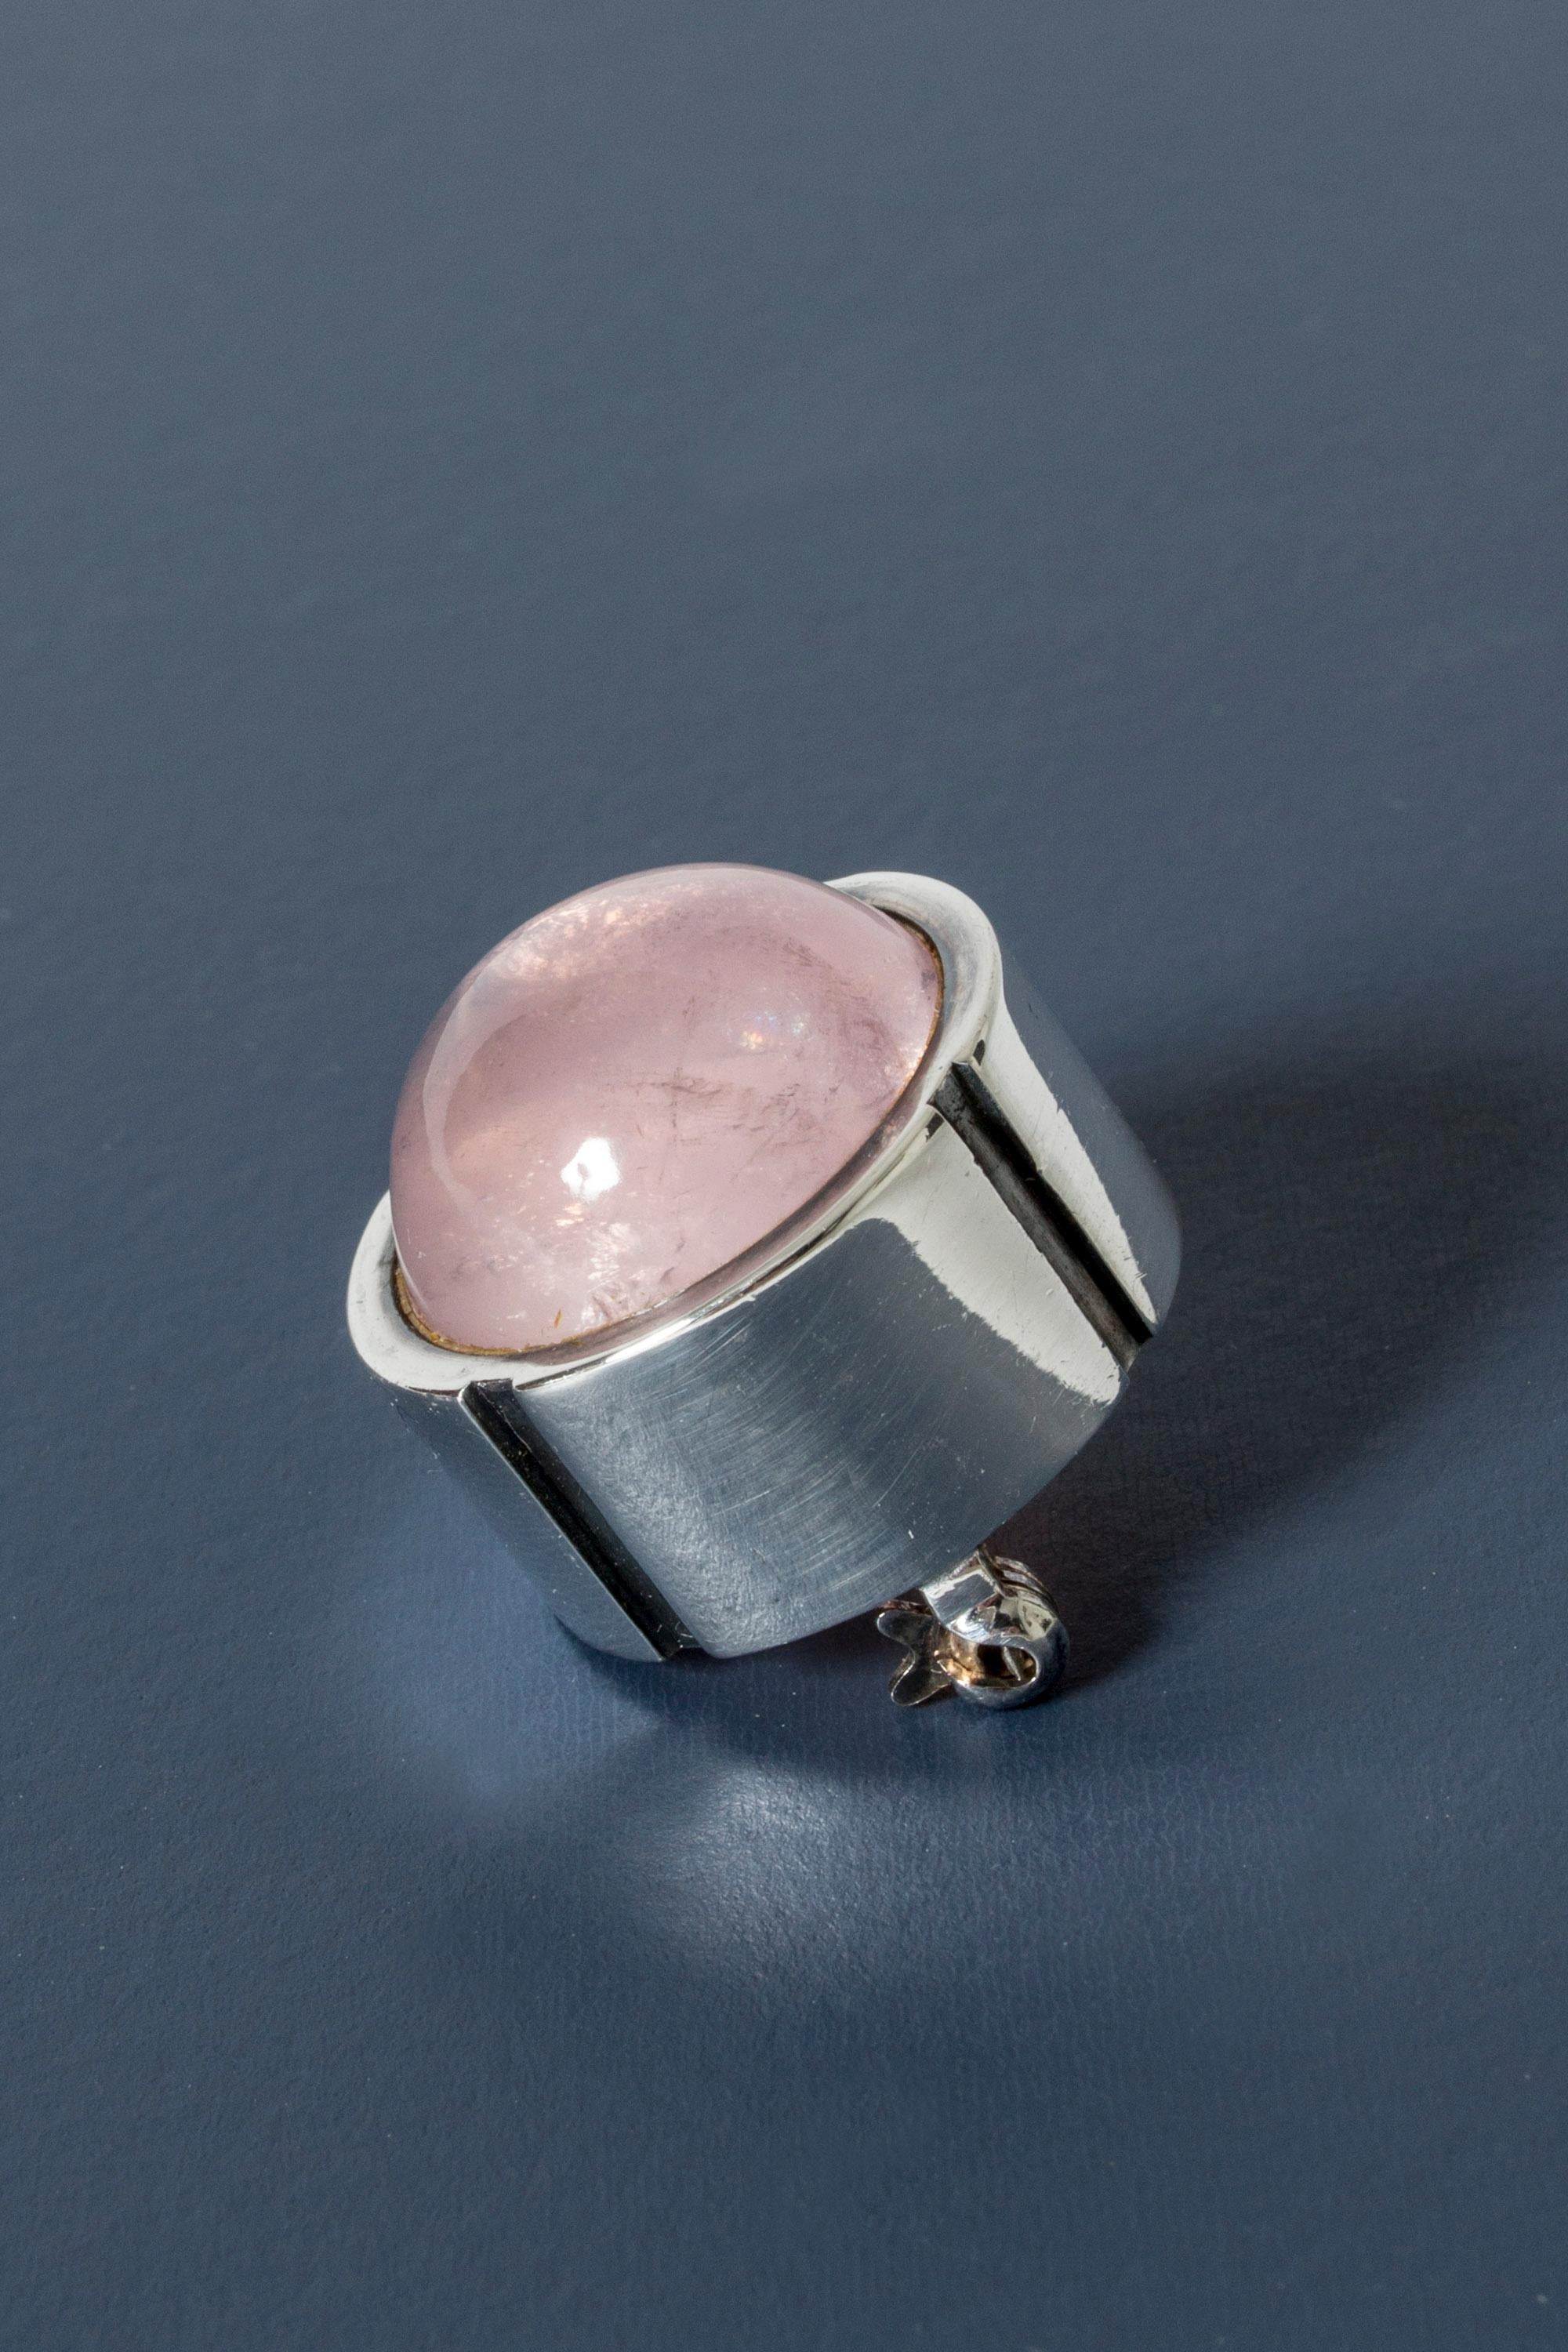 Delectable little brooch by Heikki Kaksonen, made from silver and rose quartz. Protruding, round cut stone that looks like a piece of candy. To be worn on a sturdy fabric that can carry the brooch’s weight.